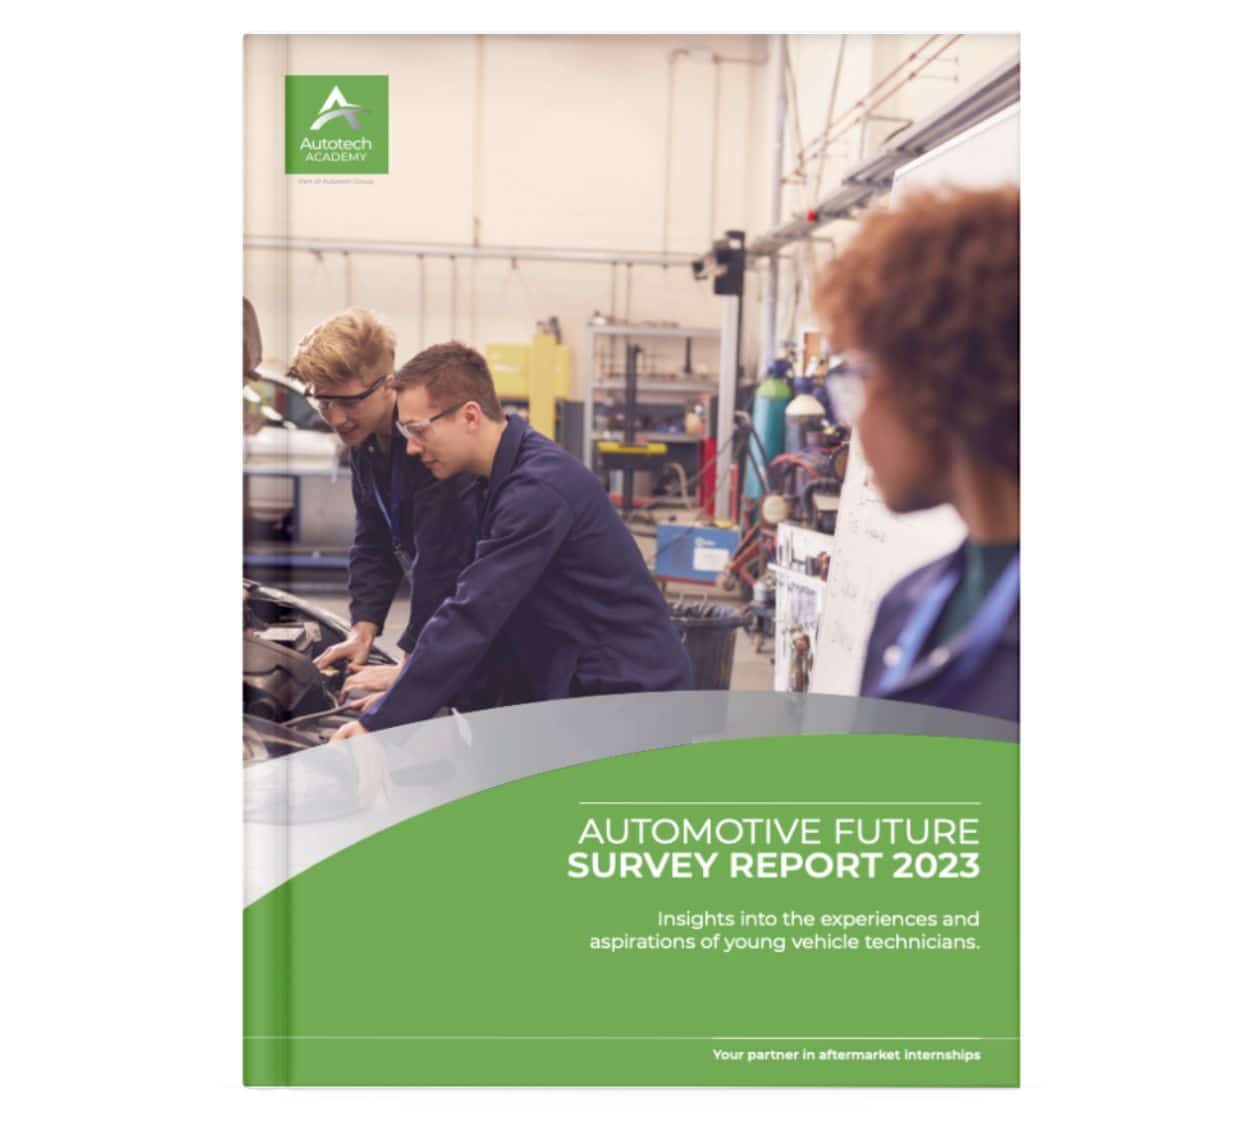 Image of the front cover of the Autotech Academy Automotive Future Survey Report 2023 showing multiple academy students working on or near a vehicle.